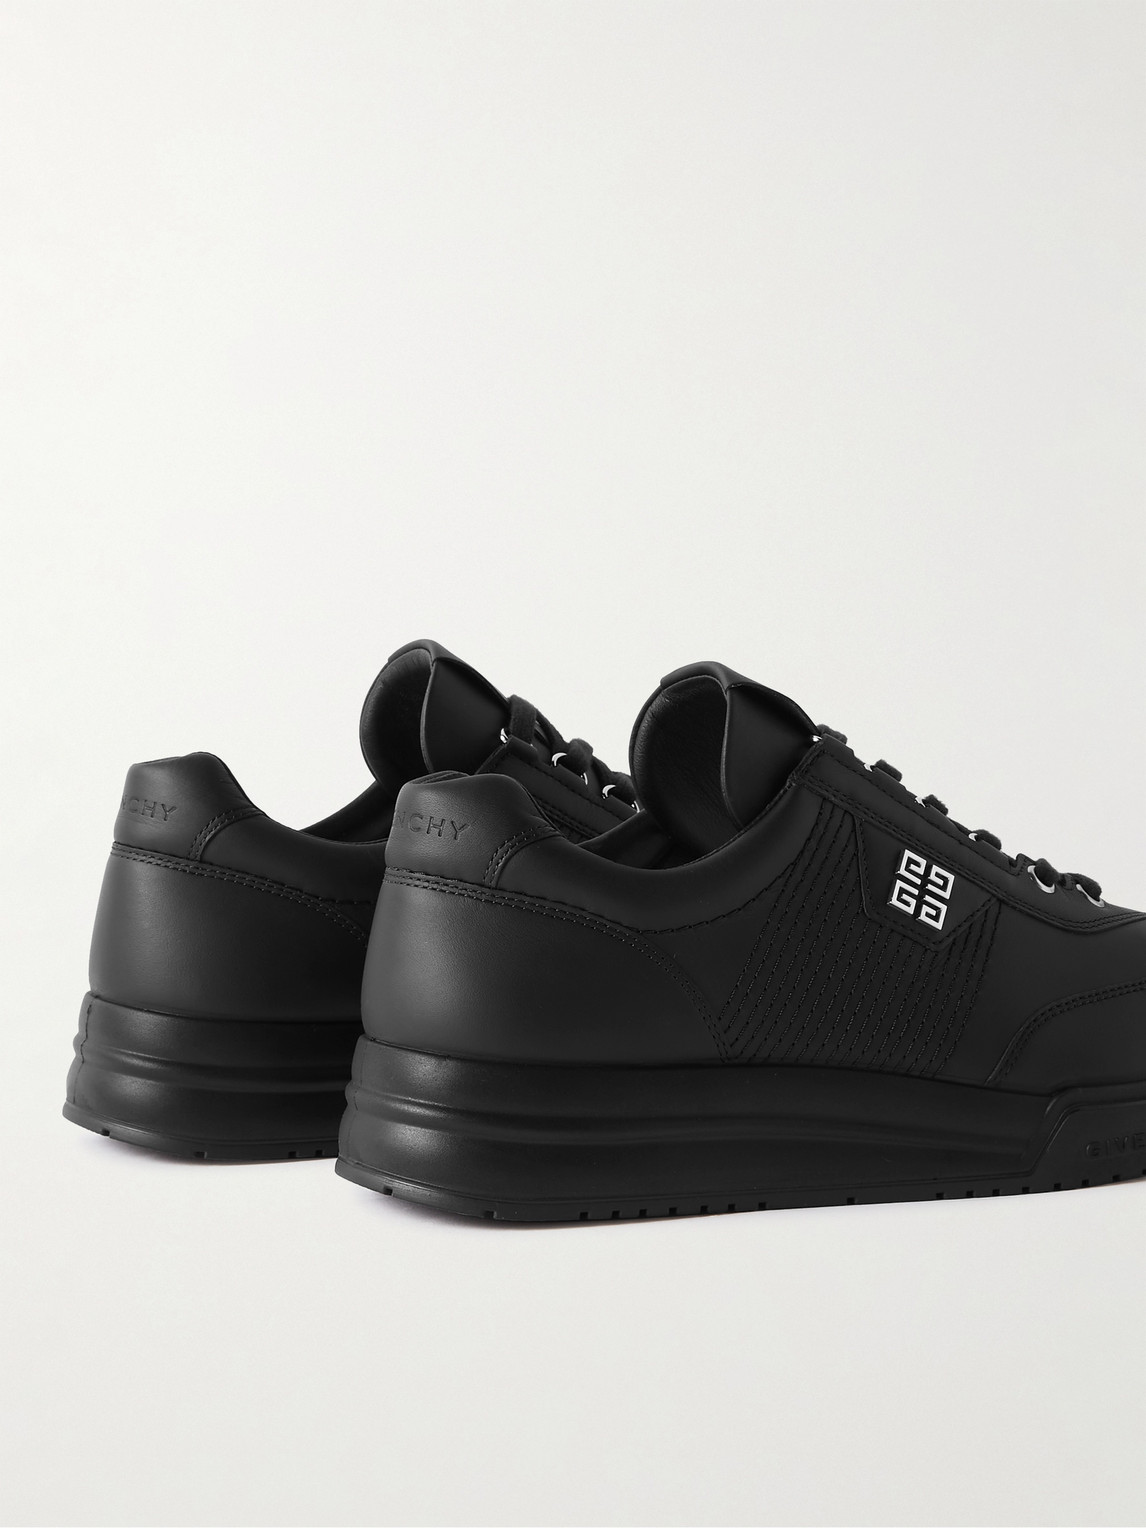 GIVENCHY G-4 LOGO-APPLIQUÉD LEATHER SNEAKERS 